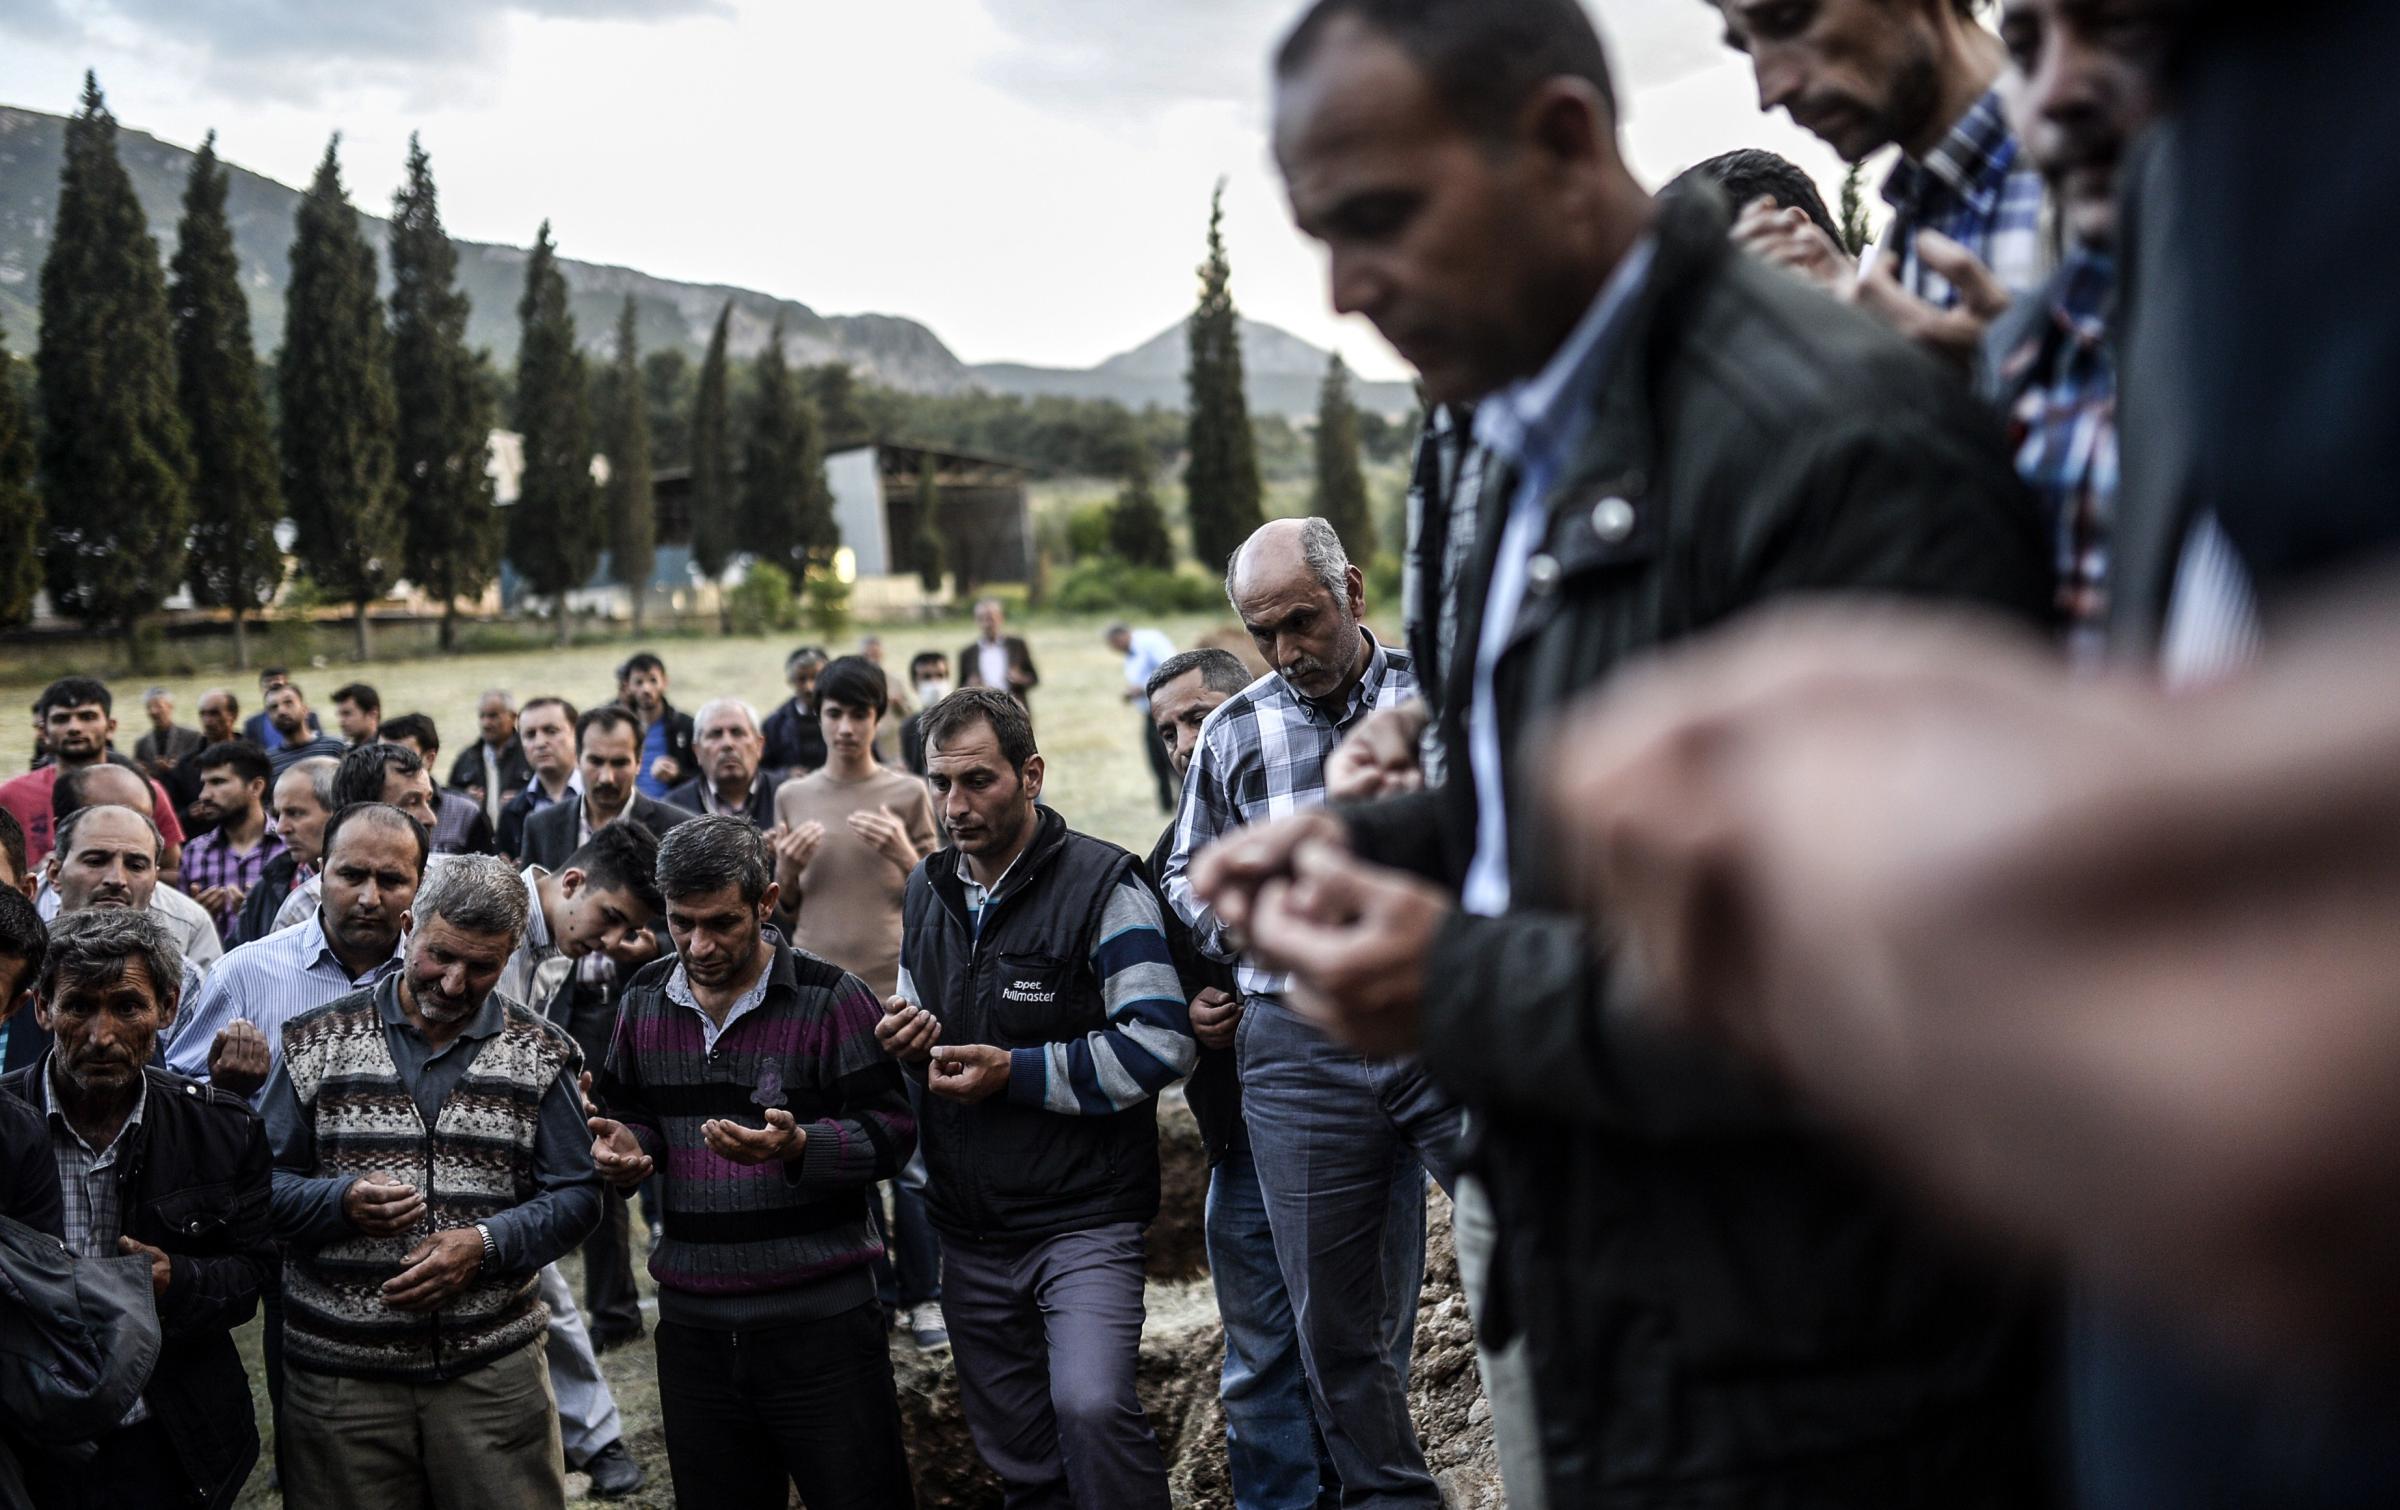 Turkish people mourn in a cemetary in Manisa on May 14, 2014, during the funeral of miners killed in a mine blast the day before in the western Turkish province of Manisa, of which the death toll hit 245.